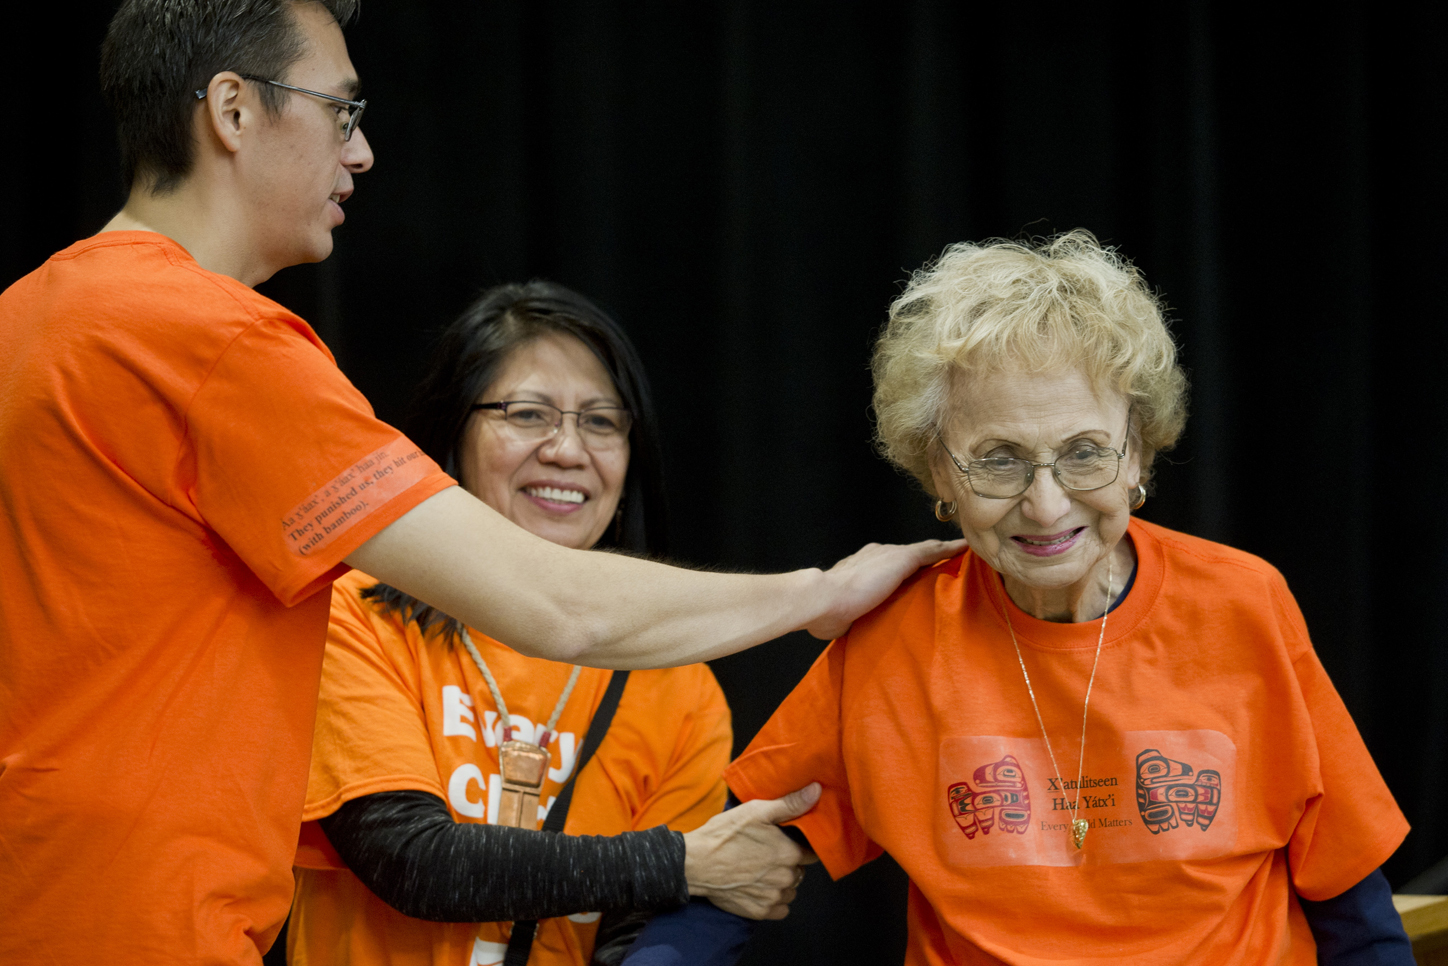 Teacher Hans Chester, left, and Barbara Cadiente-Nelson, center, thank elder Selina Everson for speaking to students, teachers and parents celebrating Orange Shirt Day in the Elizabeth Peratrovich Hall on Friday.